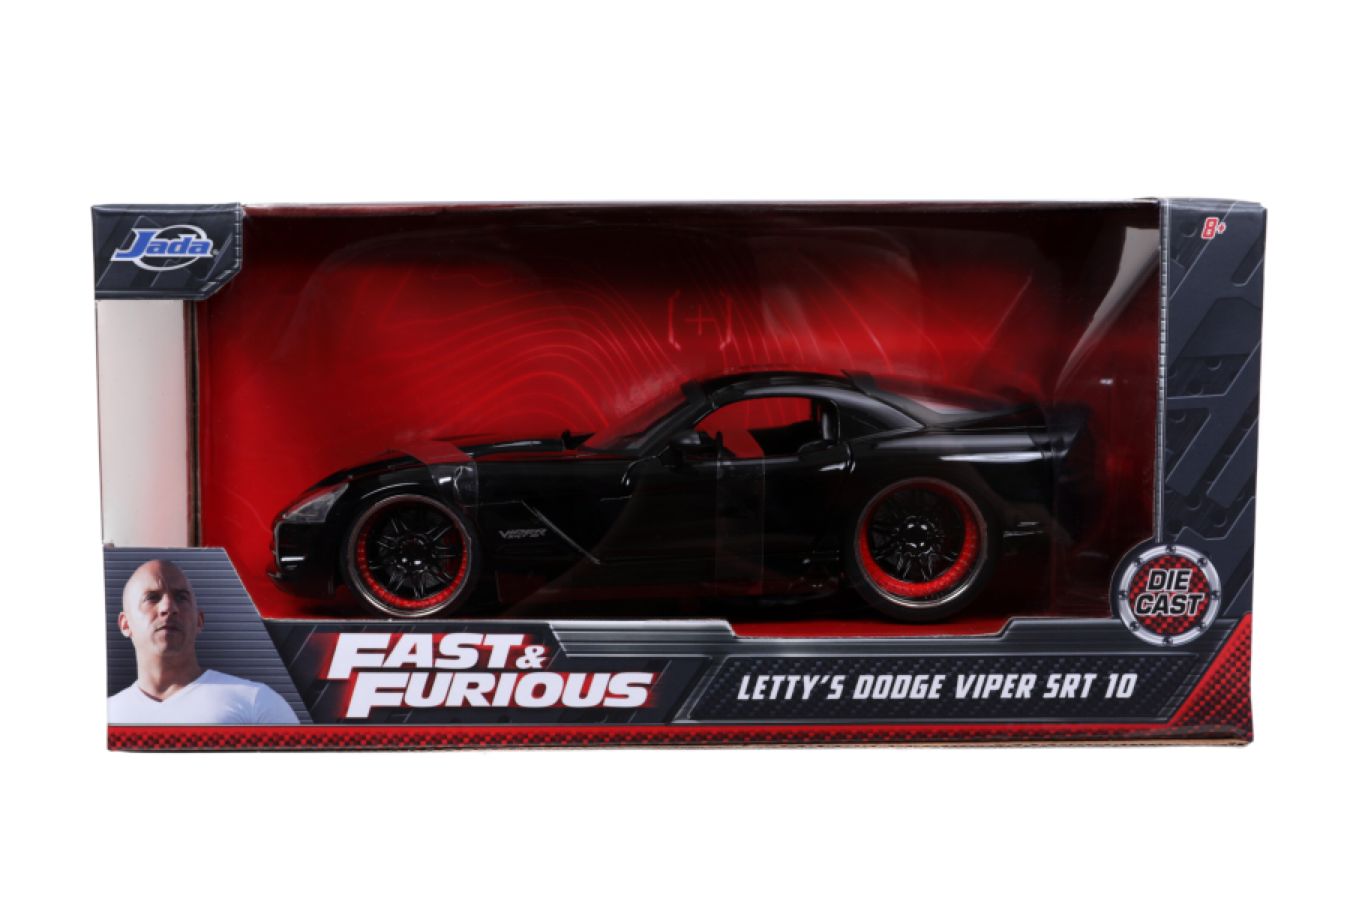 Fast and Furious - '08 Dodge Viper SRT 1:24 Scale Hollywood Ride